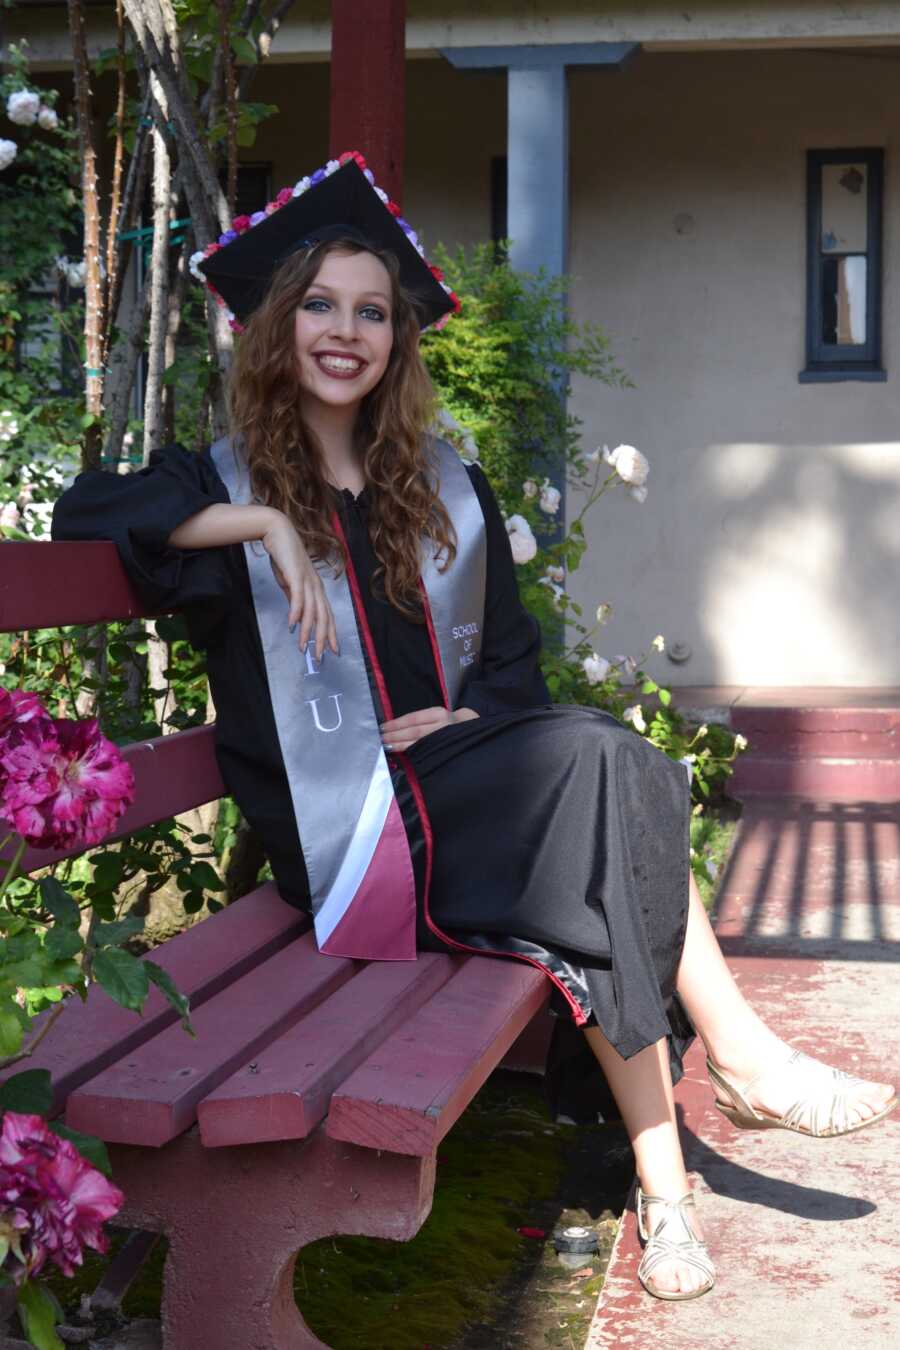 anorexic woman in college graduation gown and cap